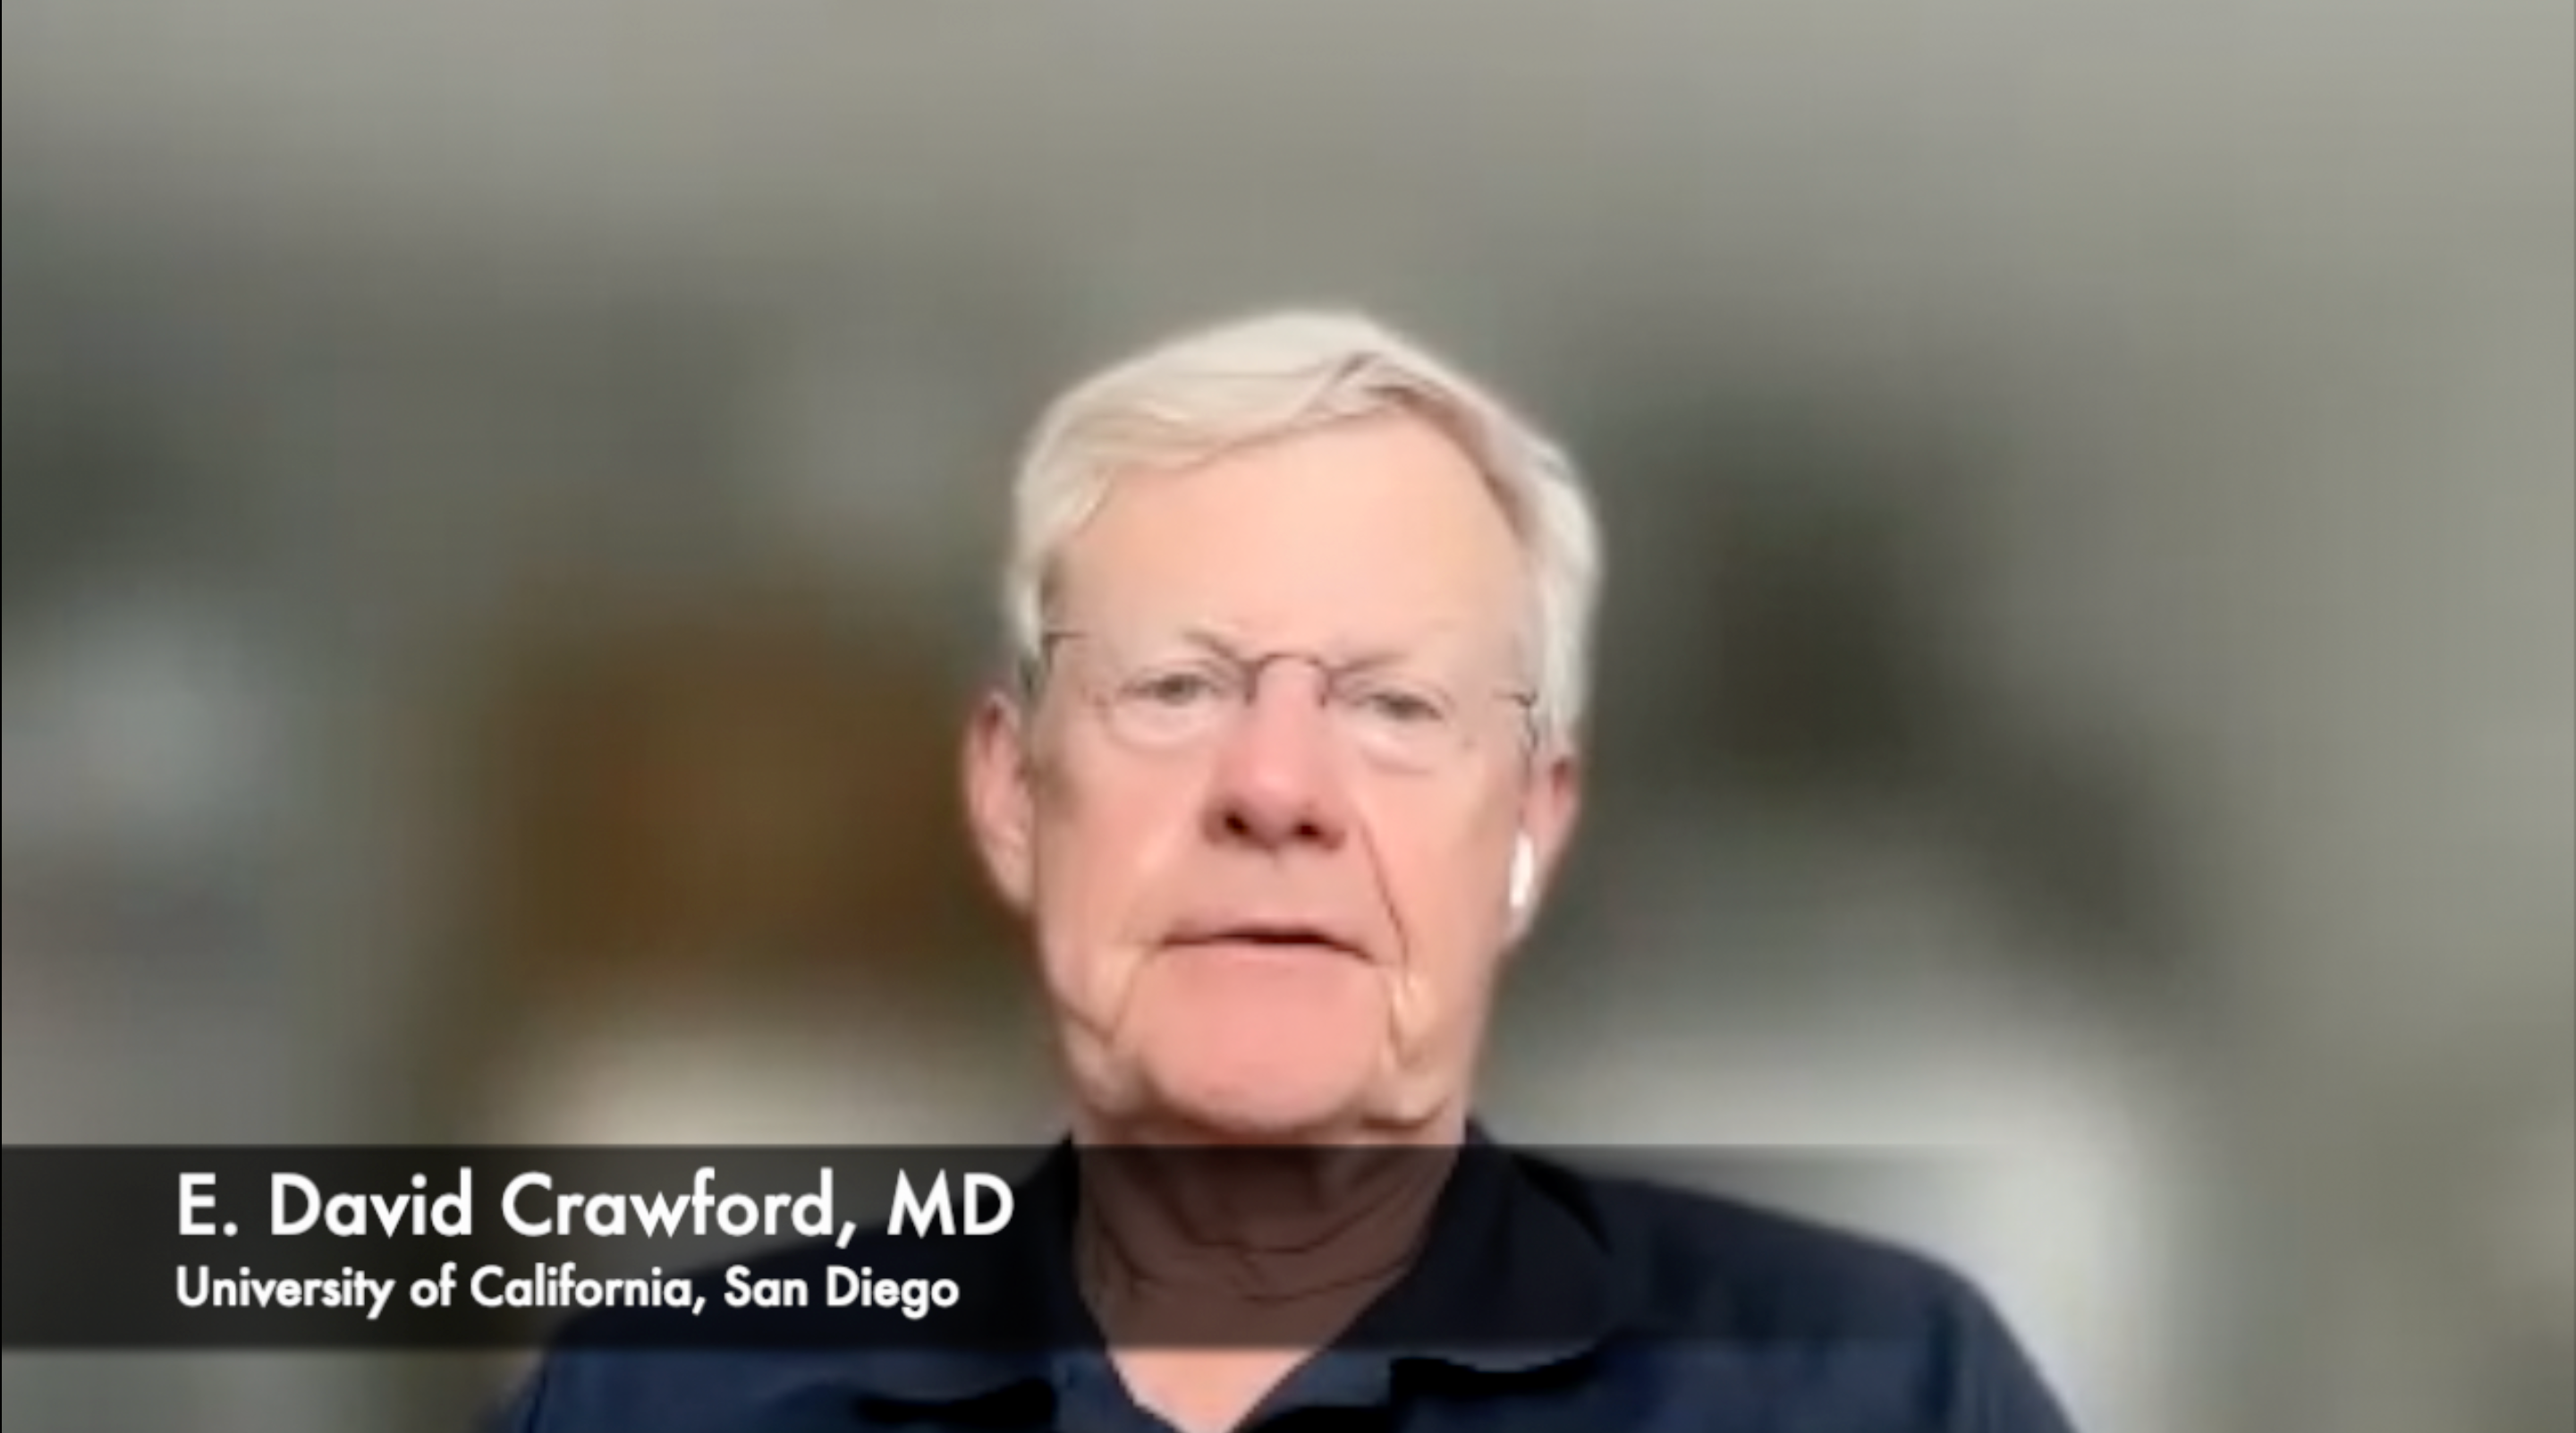 E. David Crawford, MD, Reviews Unmet Needs Addressed by FDA Approval of Darolutamide, Docetaxel, and ADT in mHSPC